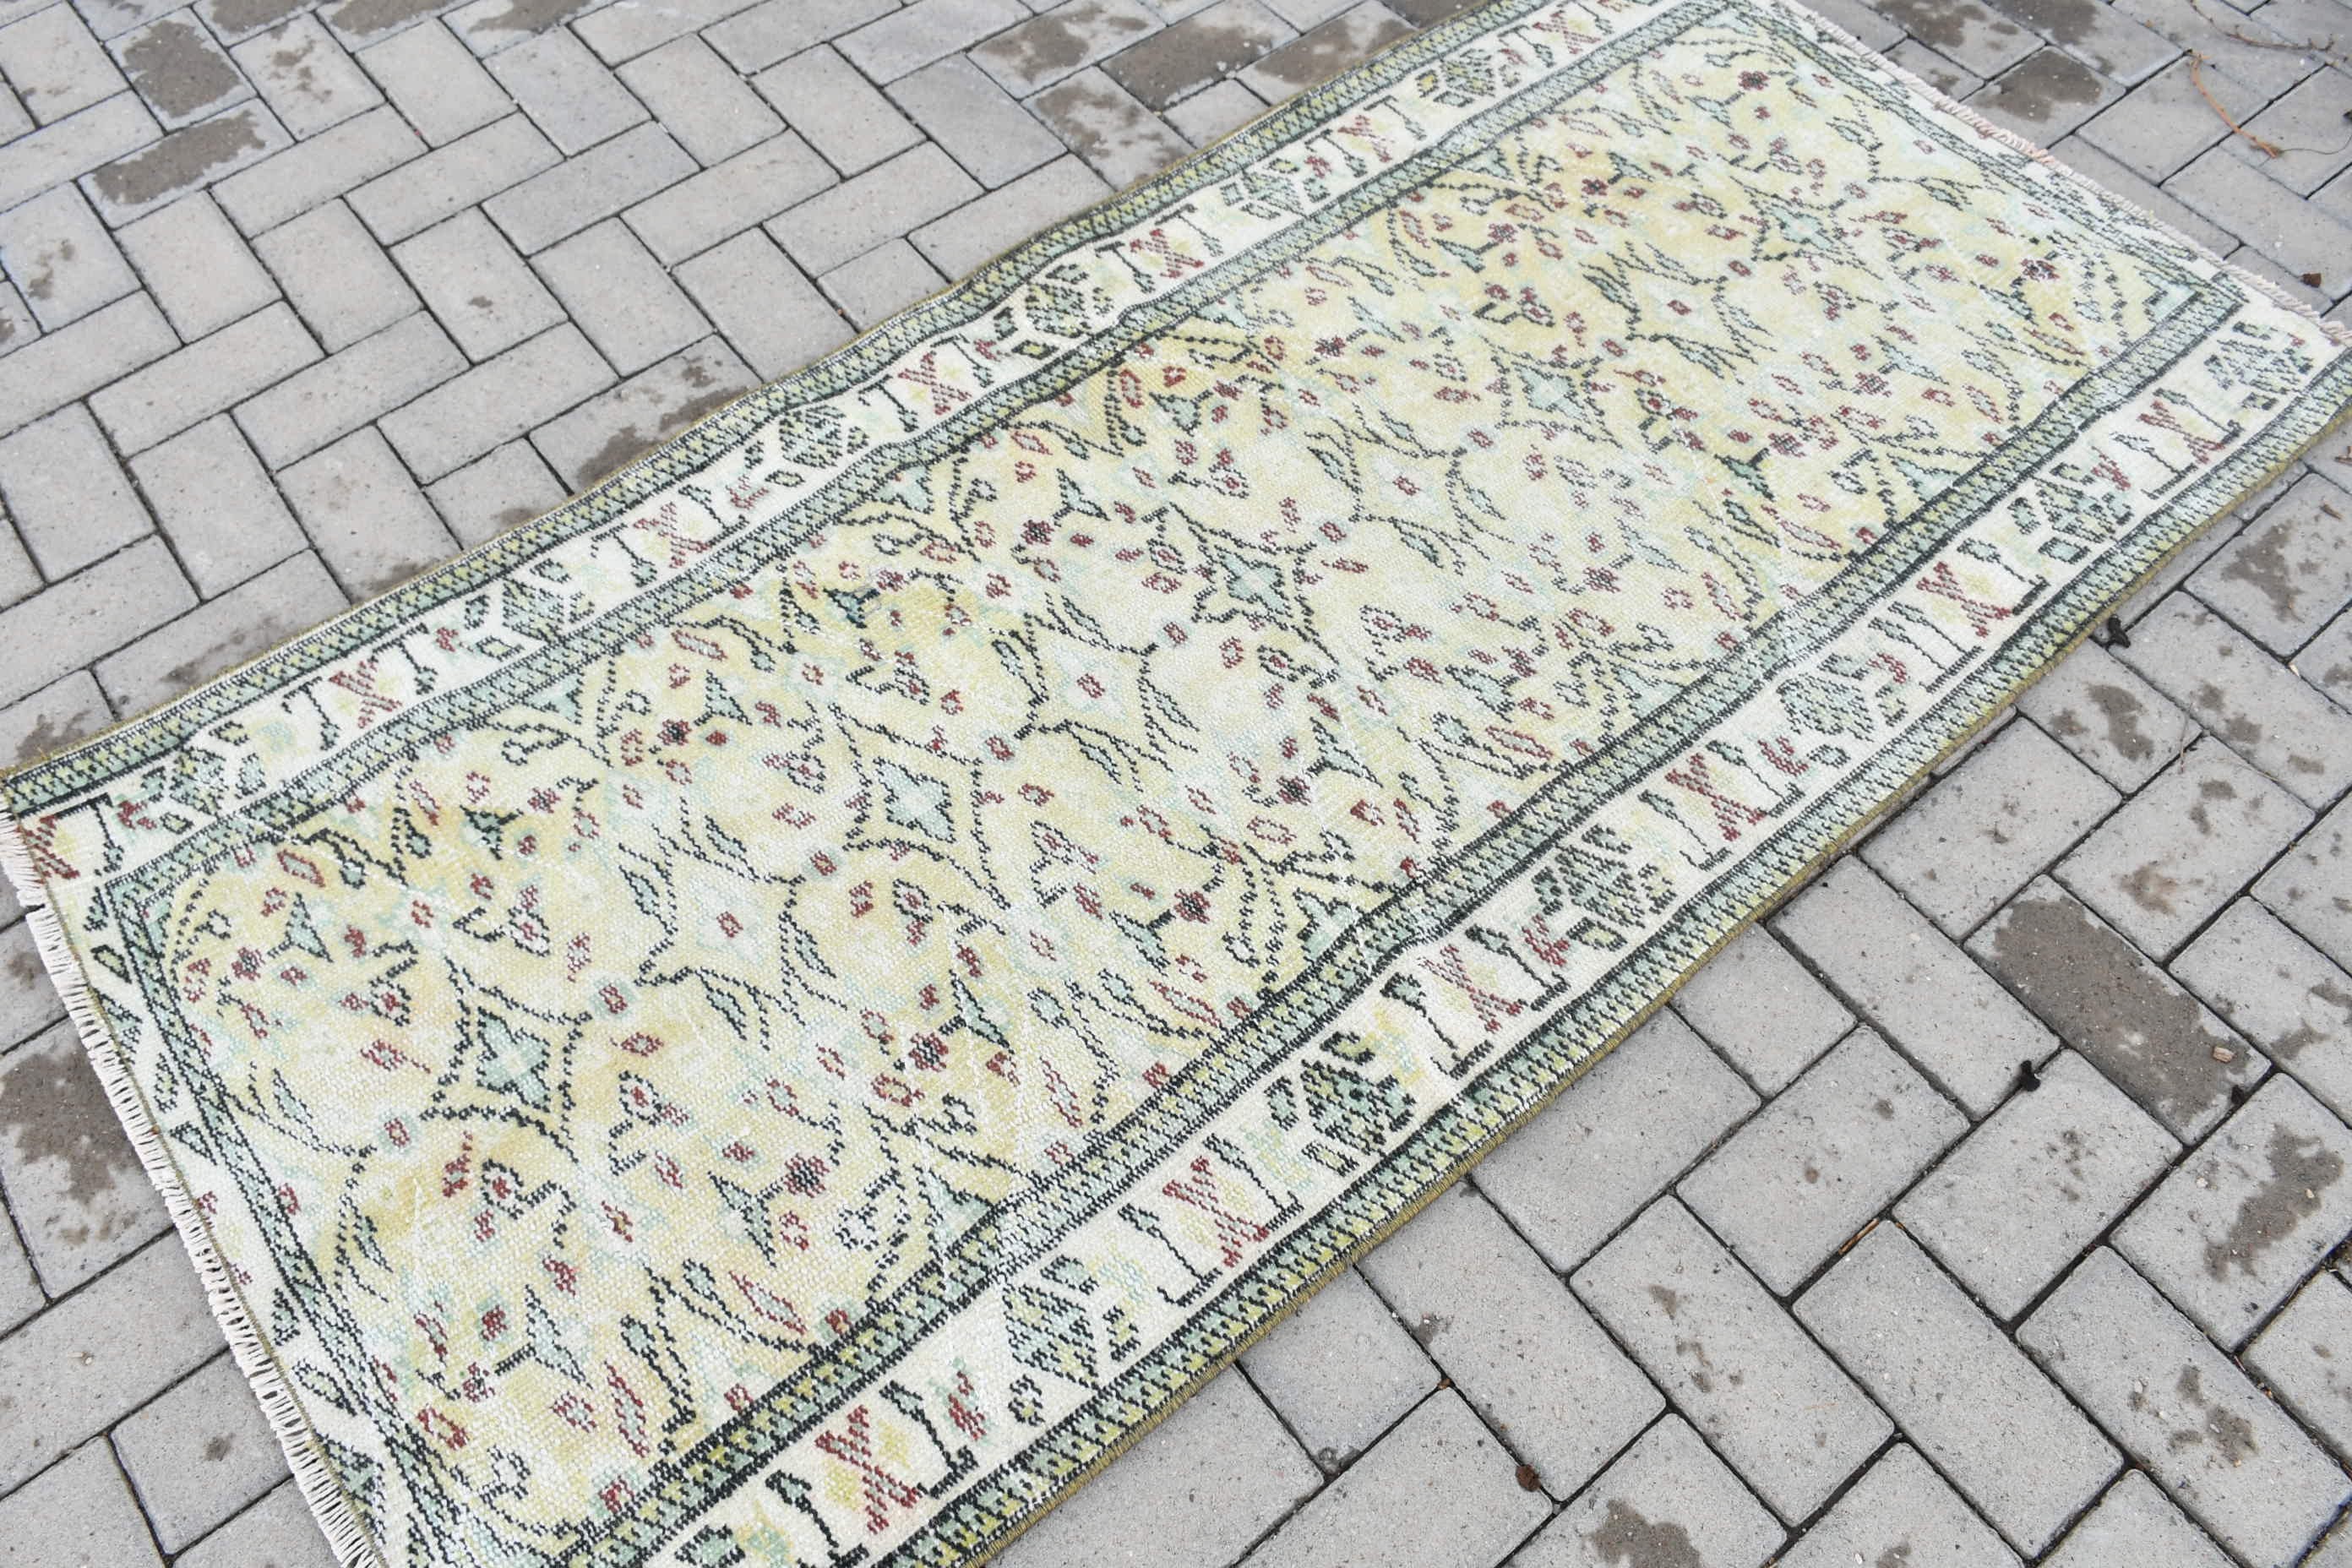 Cool Rugs, Beige Wool Rugs, Rugs for Kitchen, Entry Rug, Kitchen Rug, Nursery Rugs, 3.1x6.1 ft Accent Rug, Vintage Rug, Turkish Rug